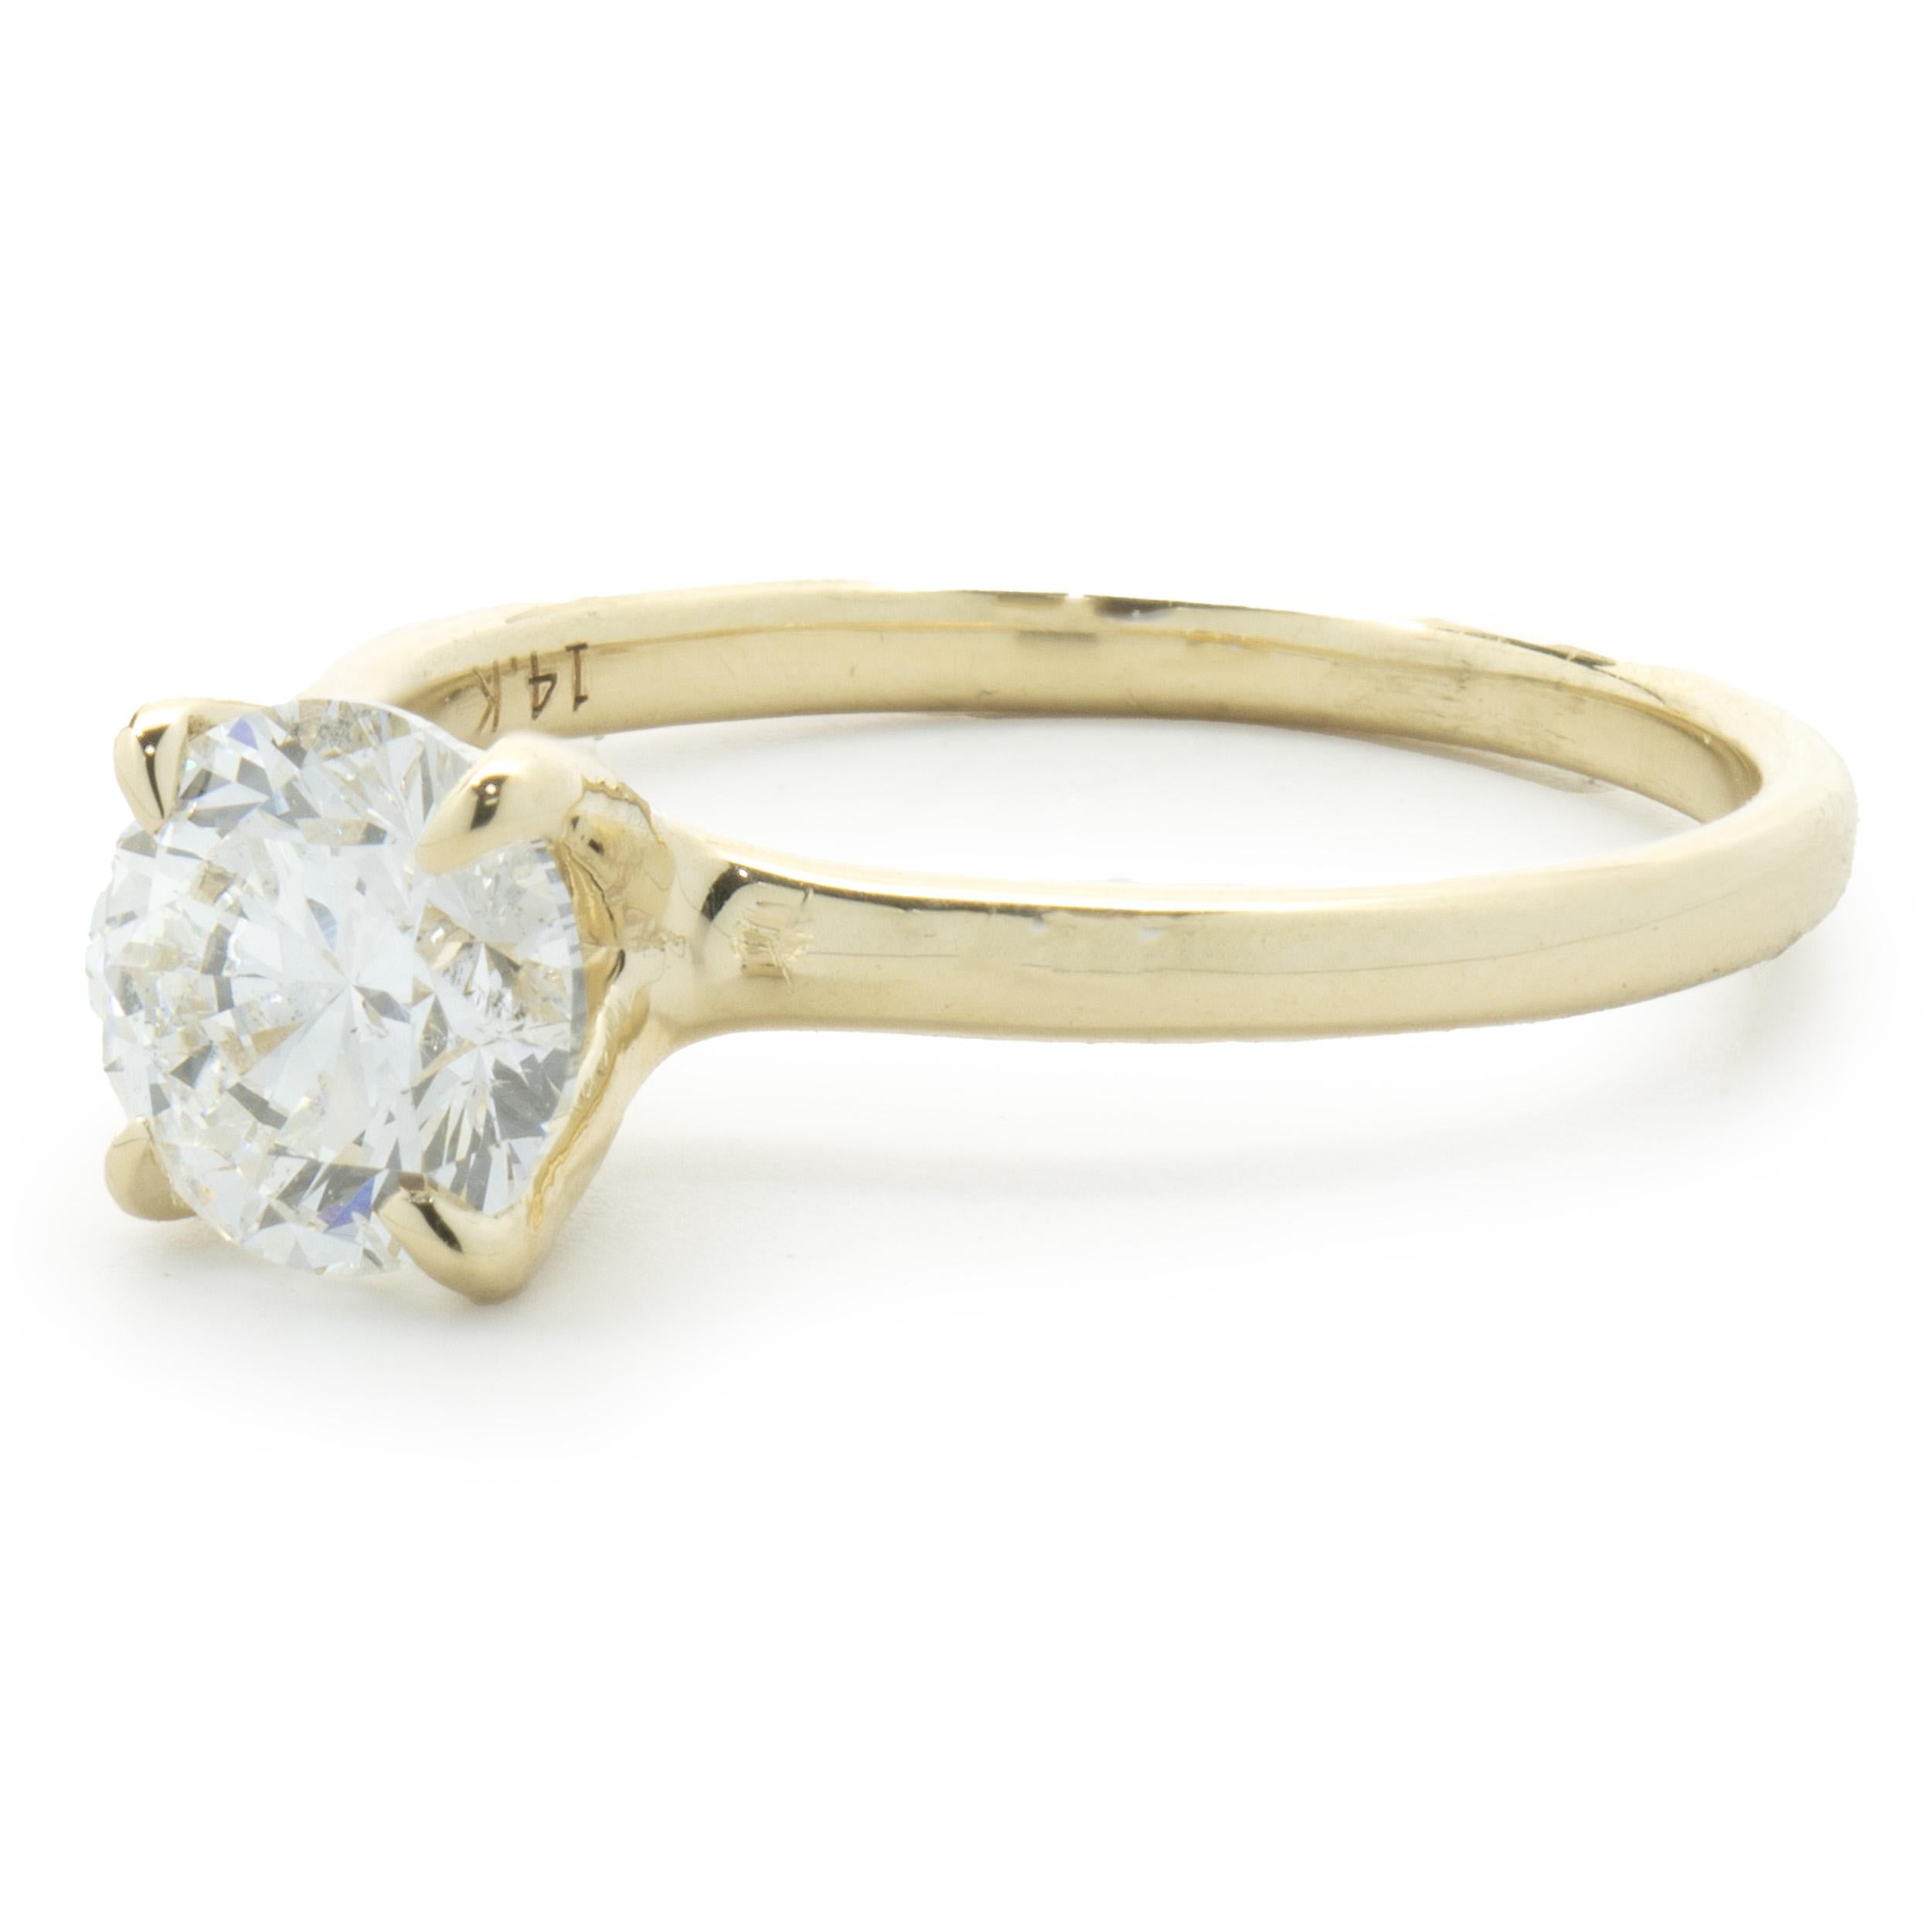 Designer: Custom
Material: 14K yellow gold
Diamond: 1 round brilliant cut = 1.21ct
Color: E
Clarity: I1
GIA: 2231068243
Dimensions: ring top measures 1.9mm wide
Ring Size: 6.75 (complimentary sizing available)
Weight: 2.45 grams